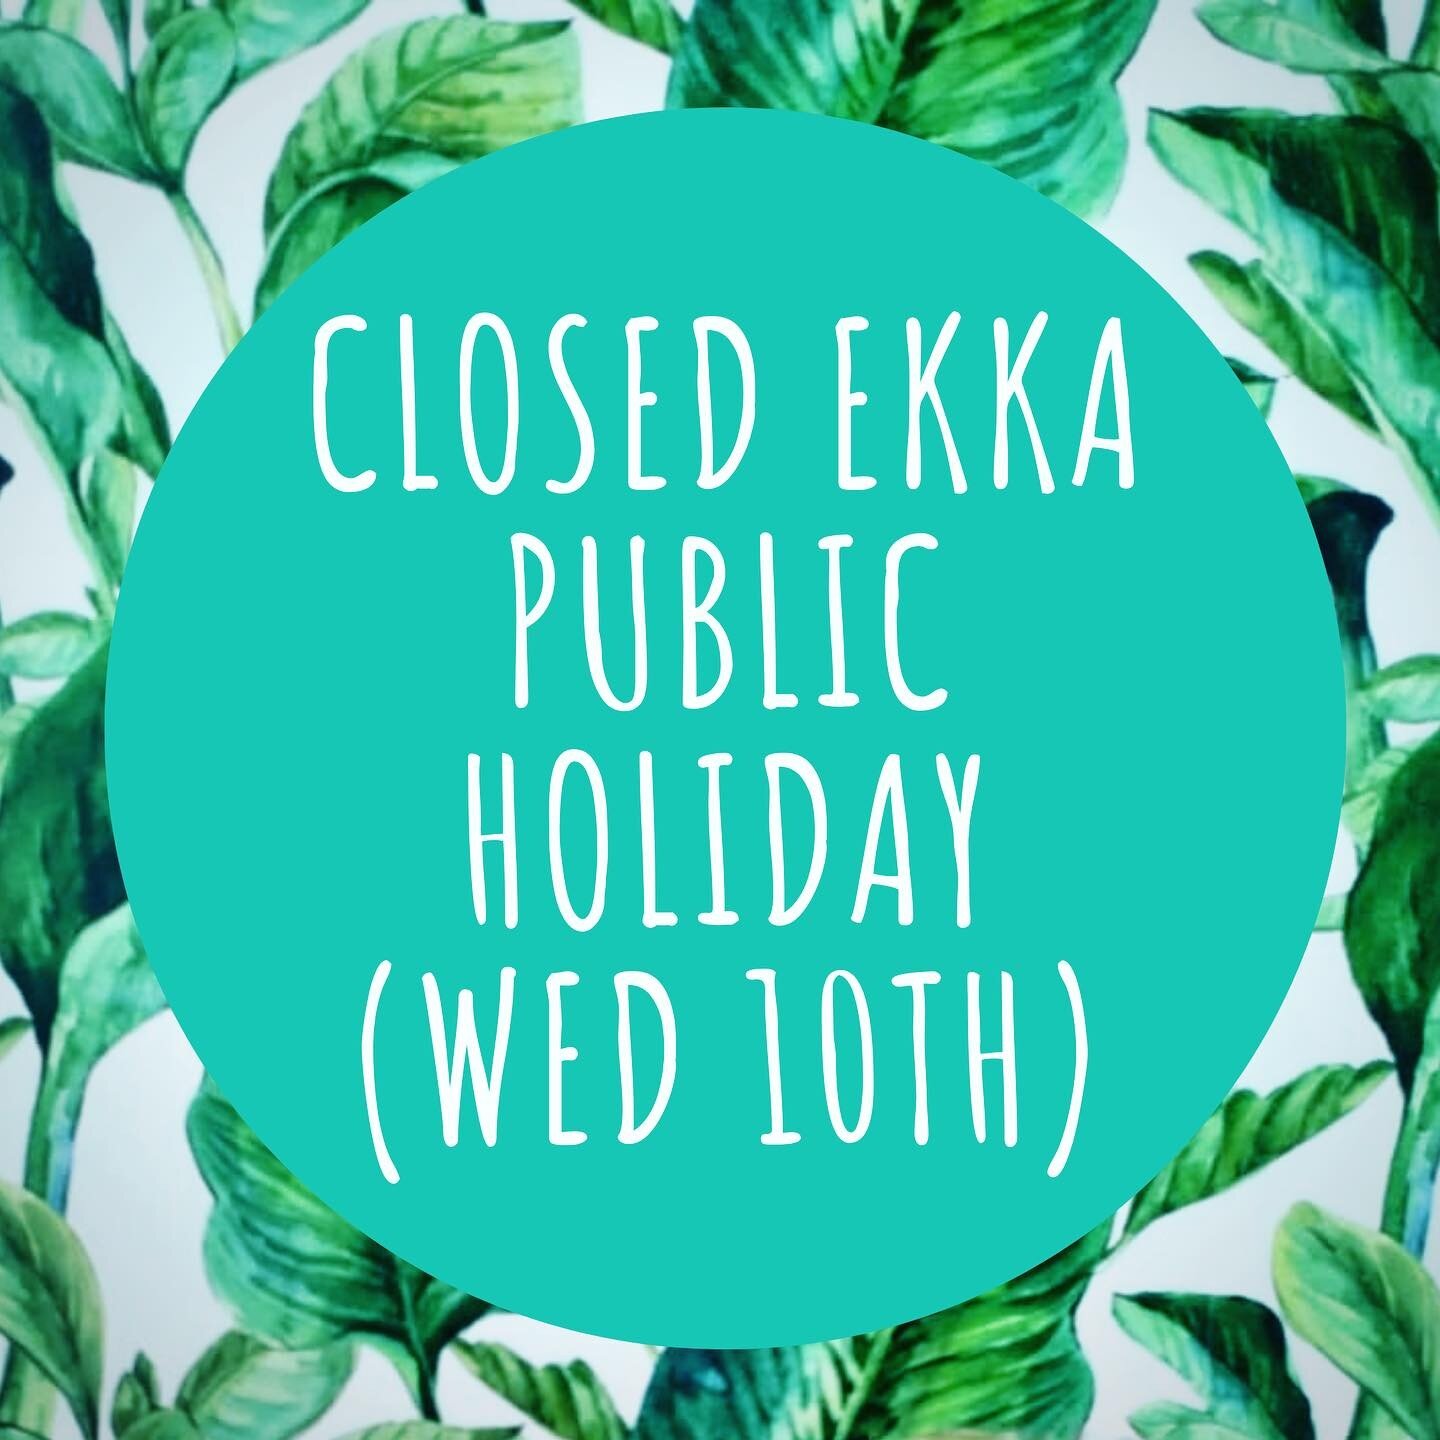 We&rsquo;ll be closed this Wednesday folks. Sorry! X